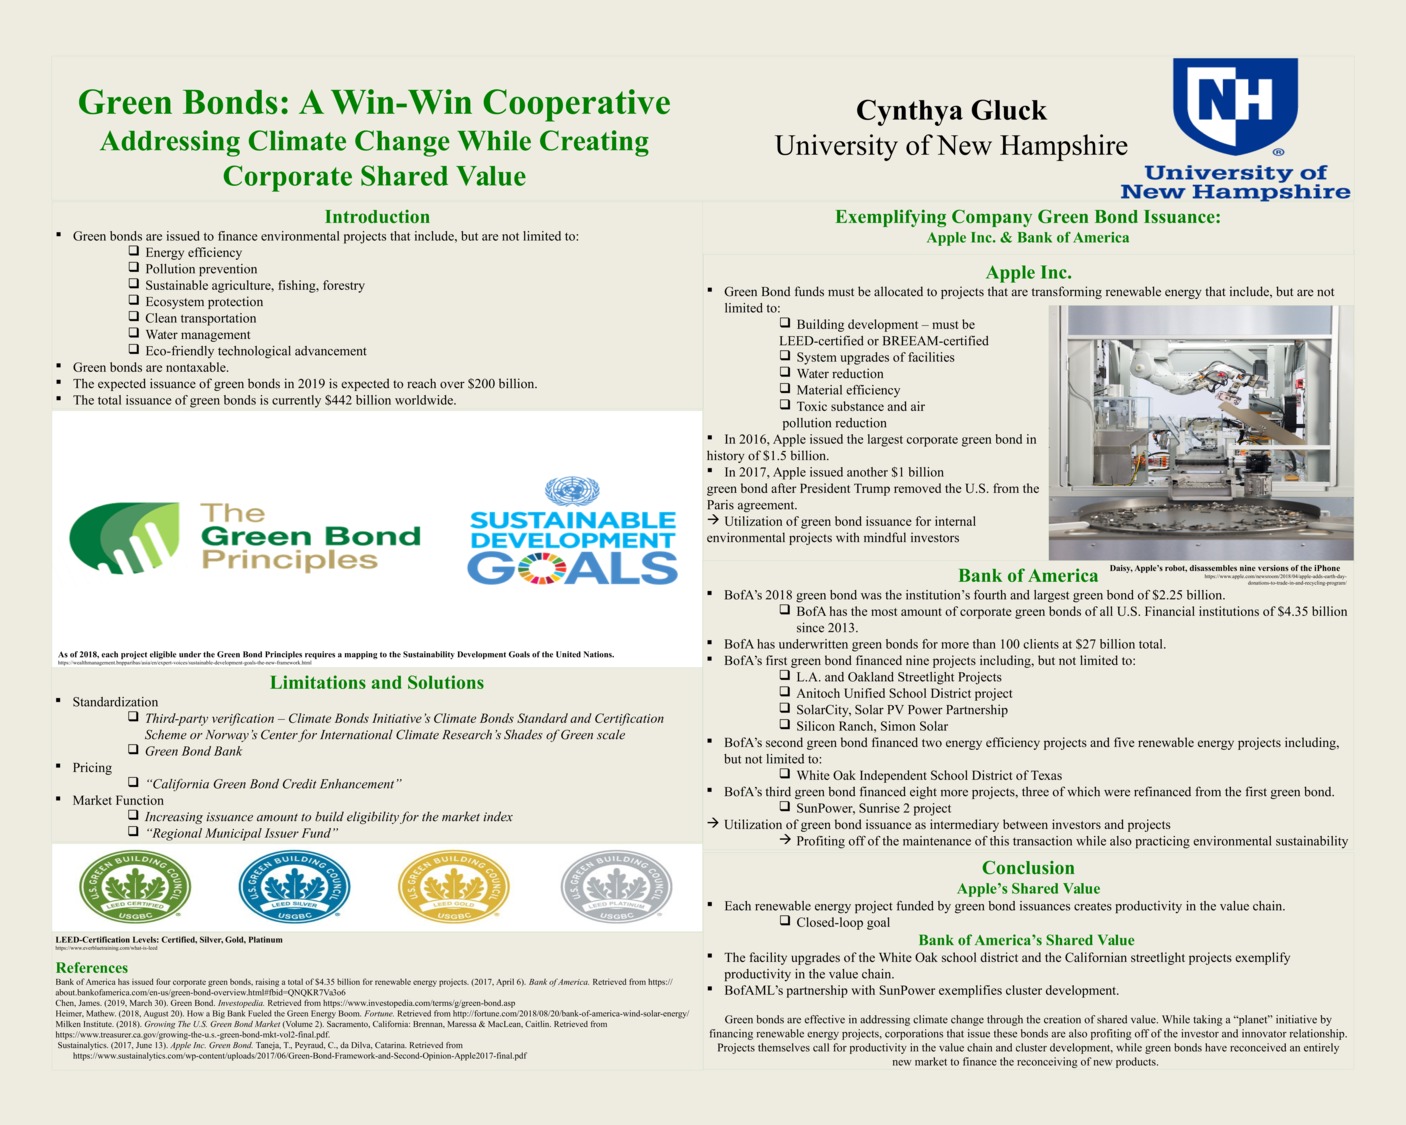 Green Bonds: A Win-Win Cooperative by cg1154